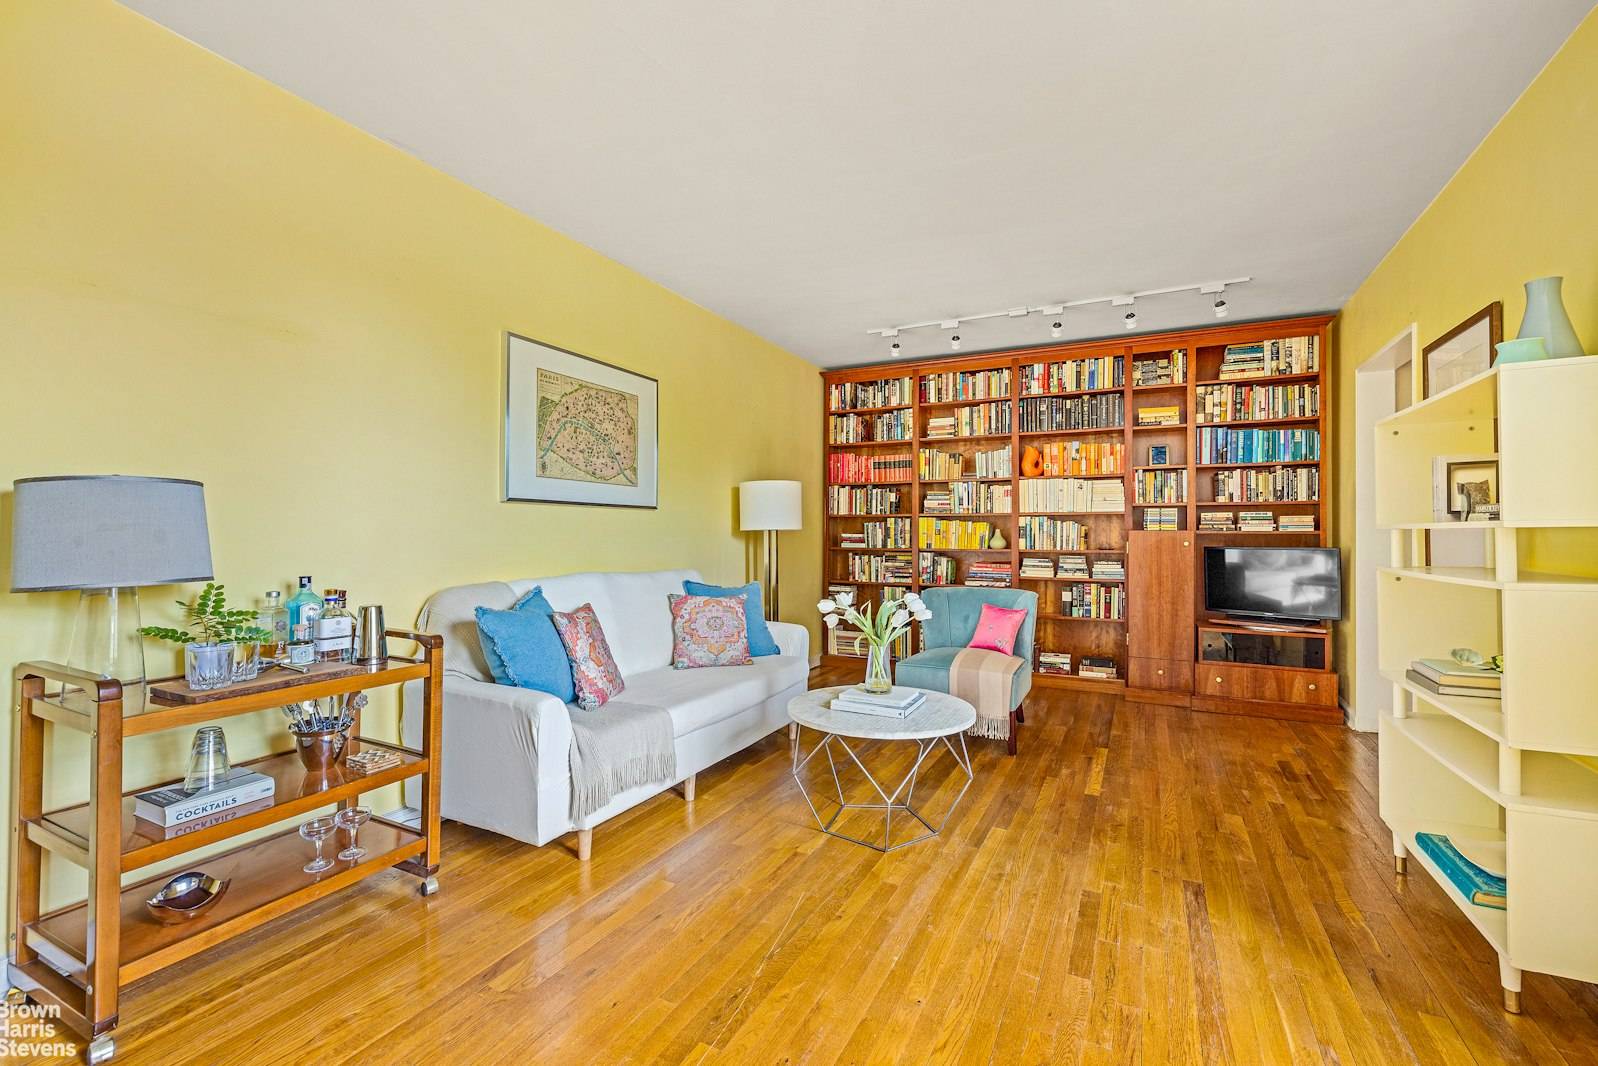 Large One bedroom One Bath in Kensington 425, 000, Maintenance 848Welcome to this delightful one bedroom, one bath home at 36 Dahill Road, located in quaint Kensington.